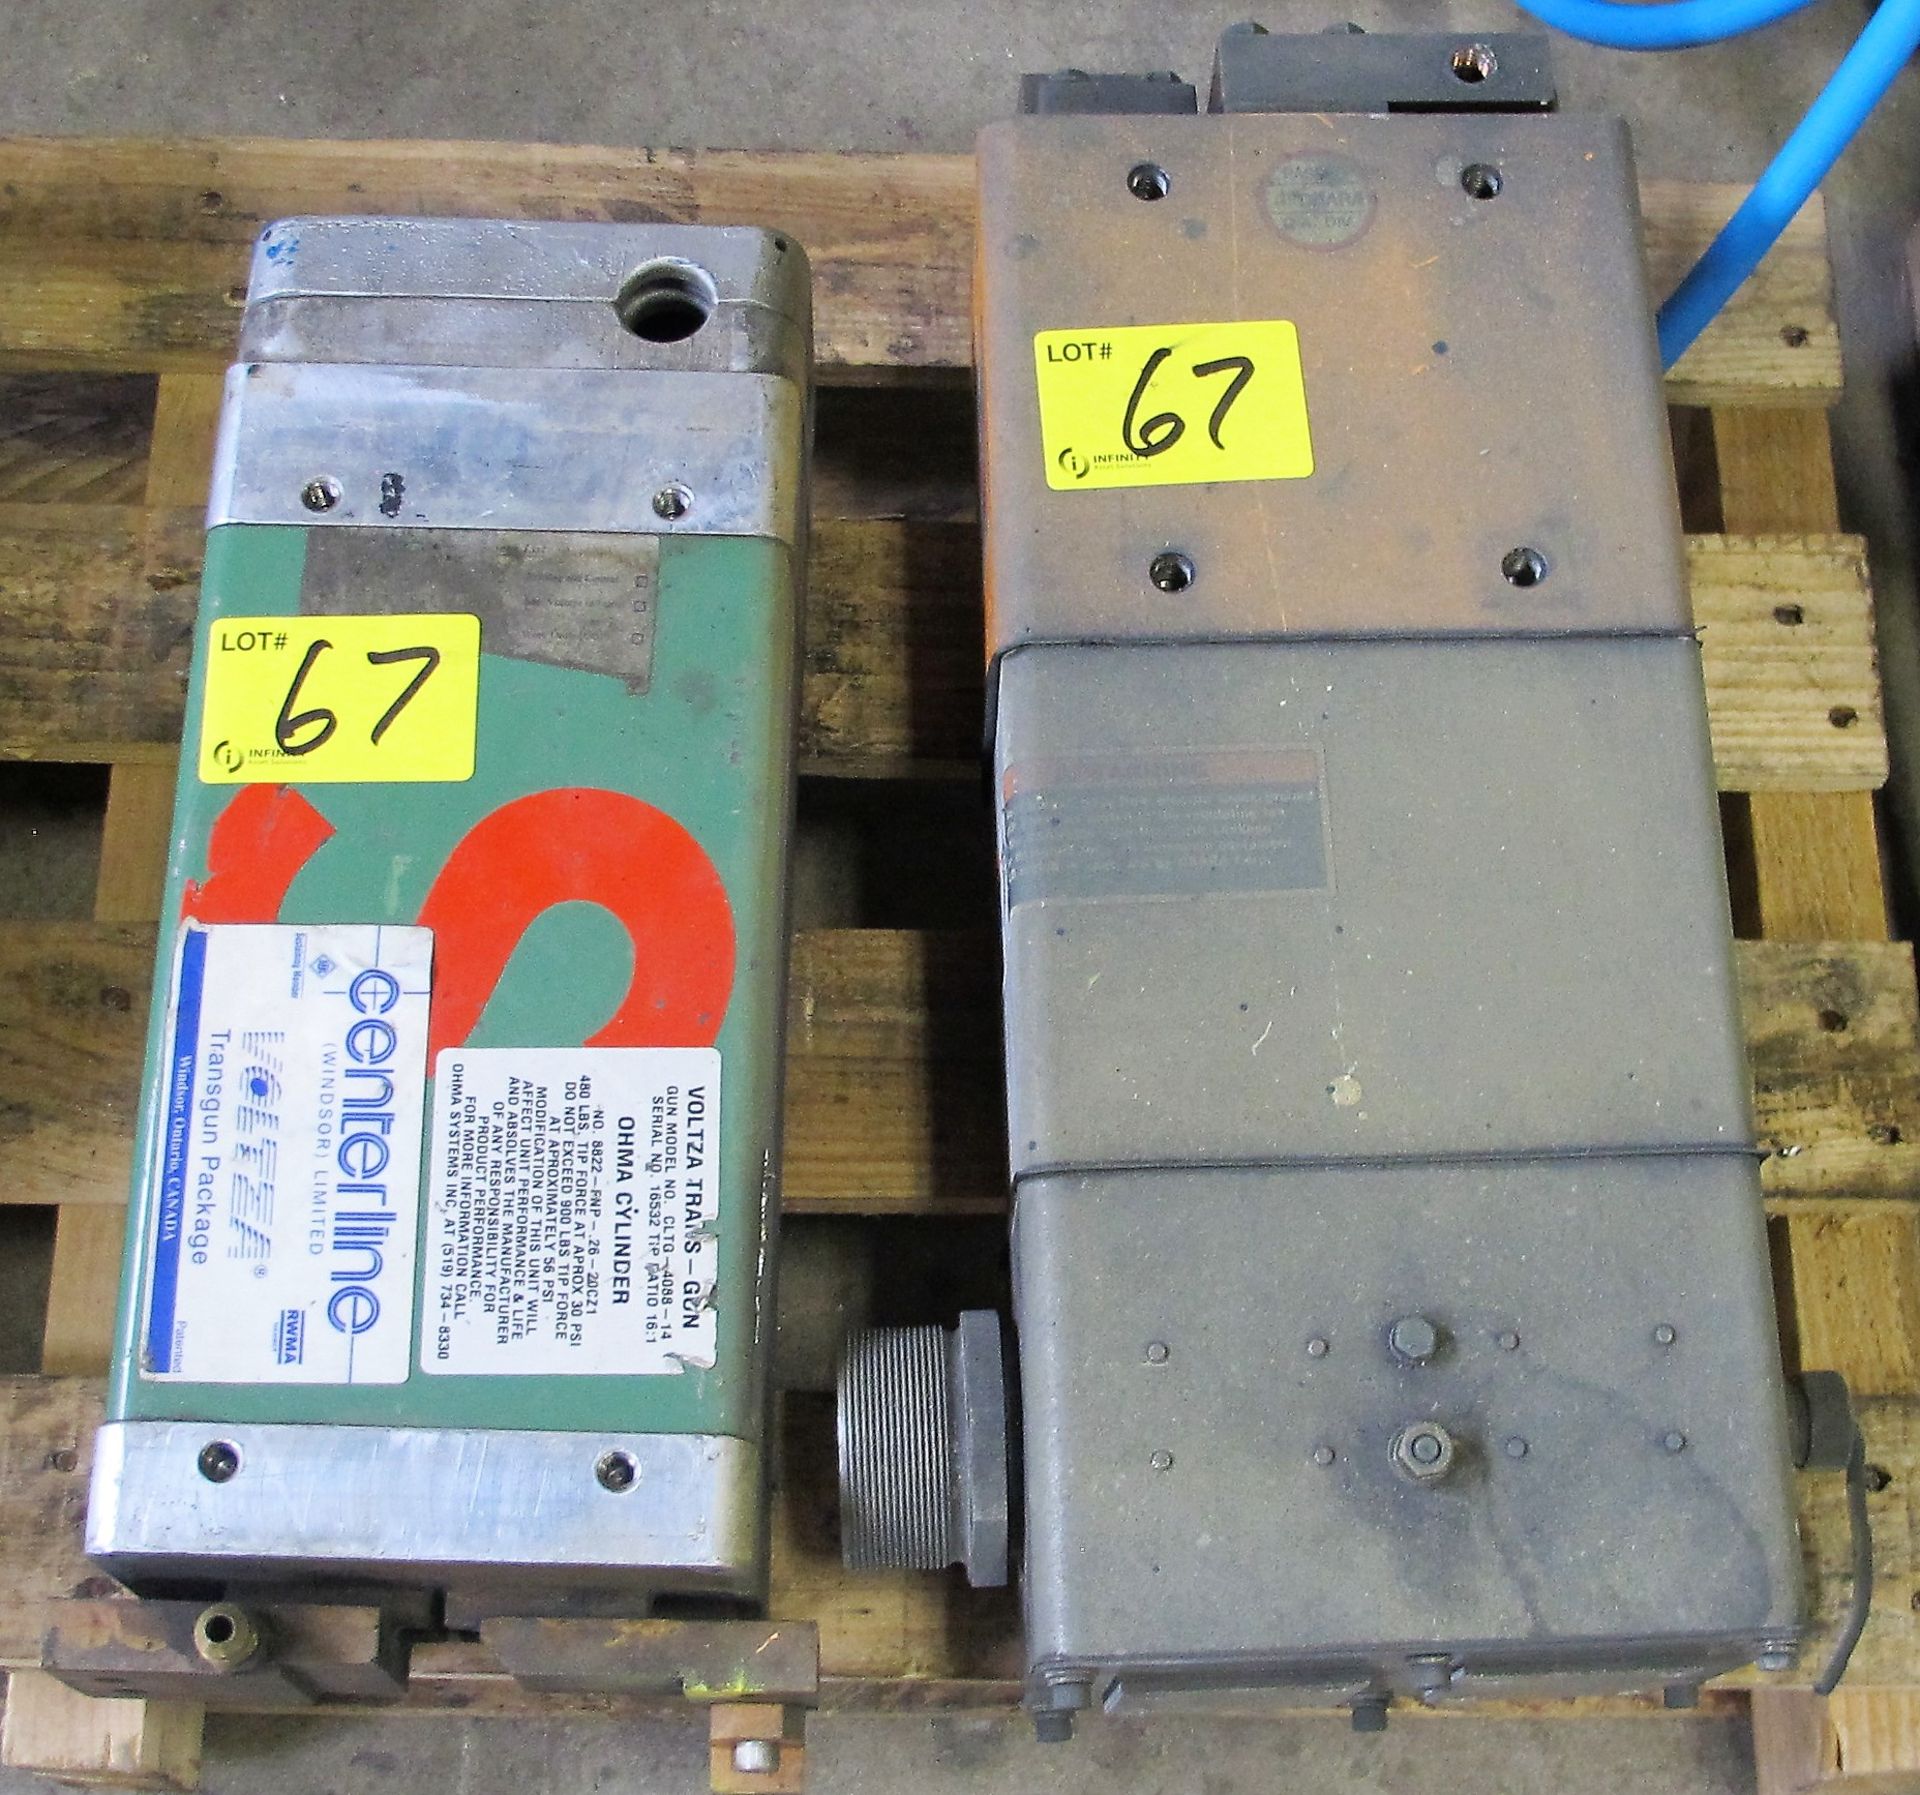 CENTERLINE AND OBARA APPROX. 110KVA WELDING TRANSFORMERS